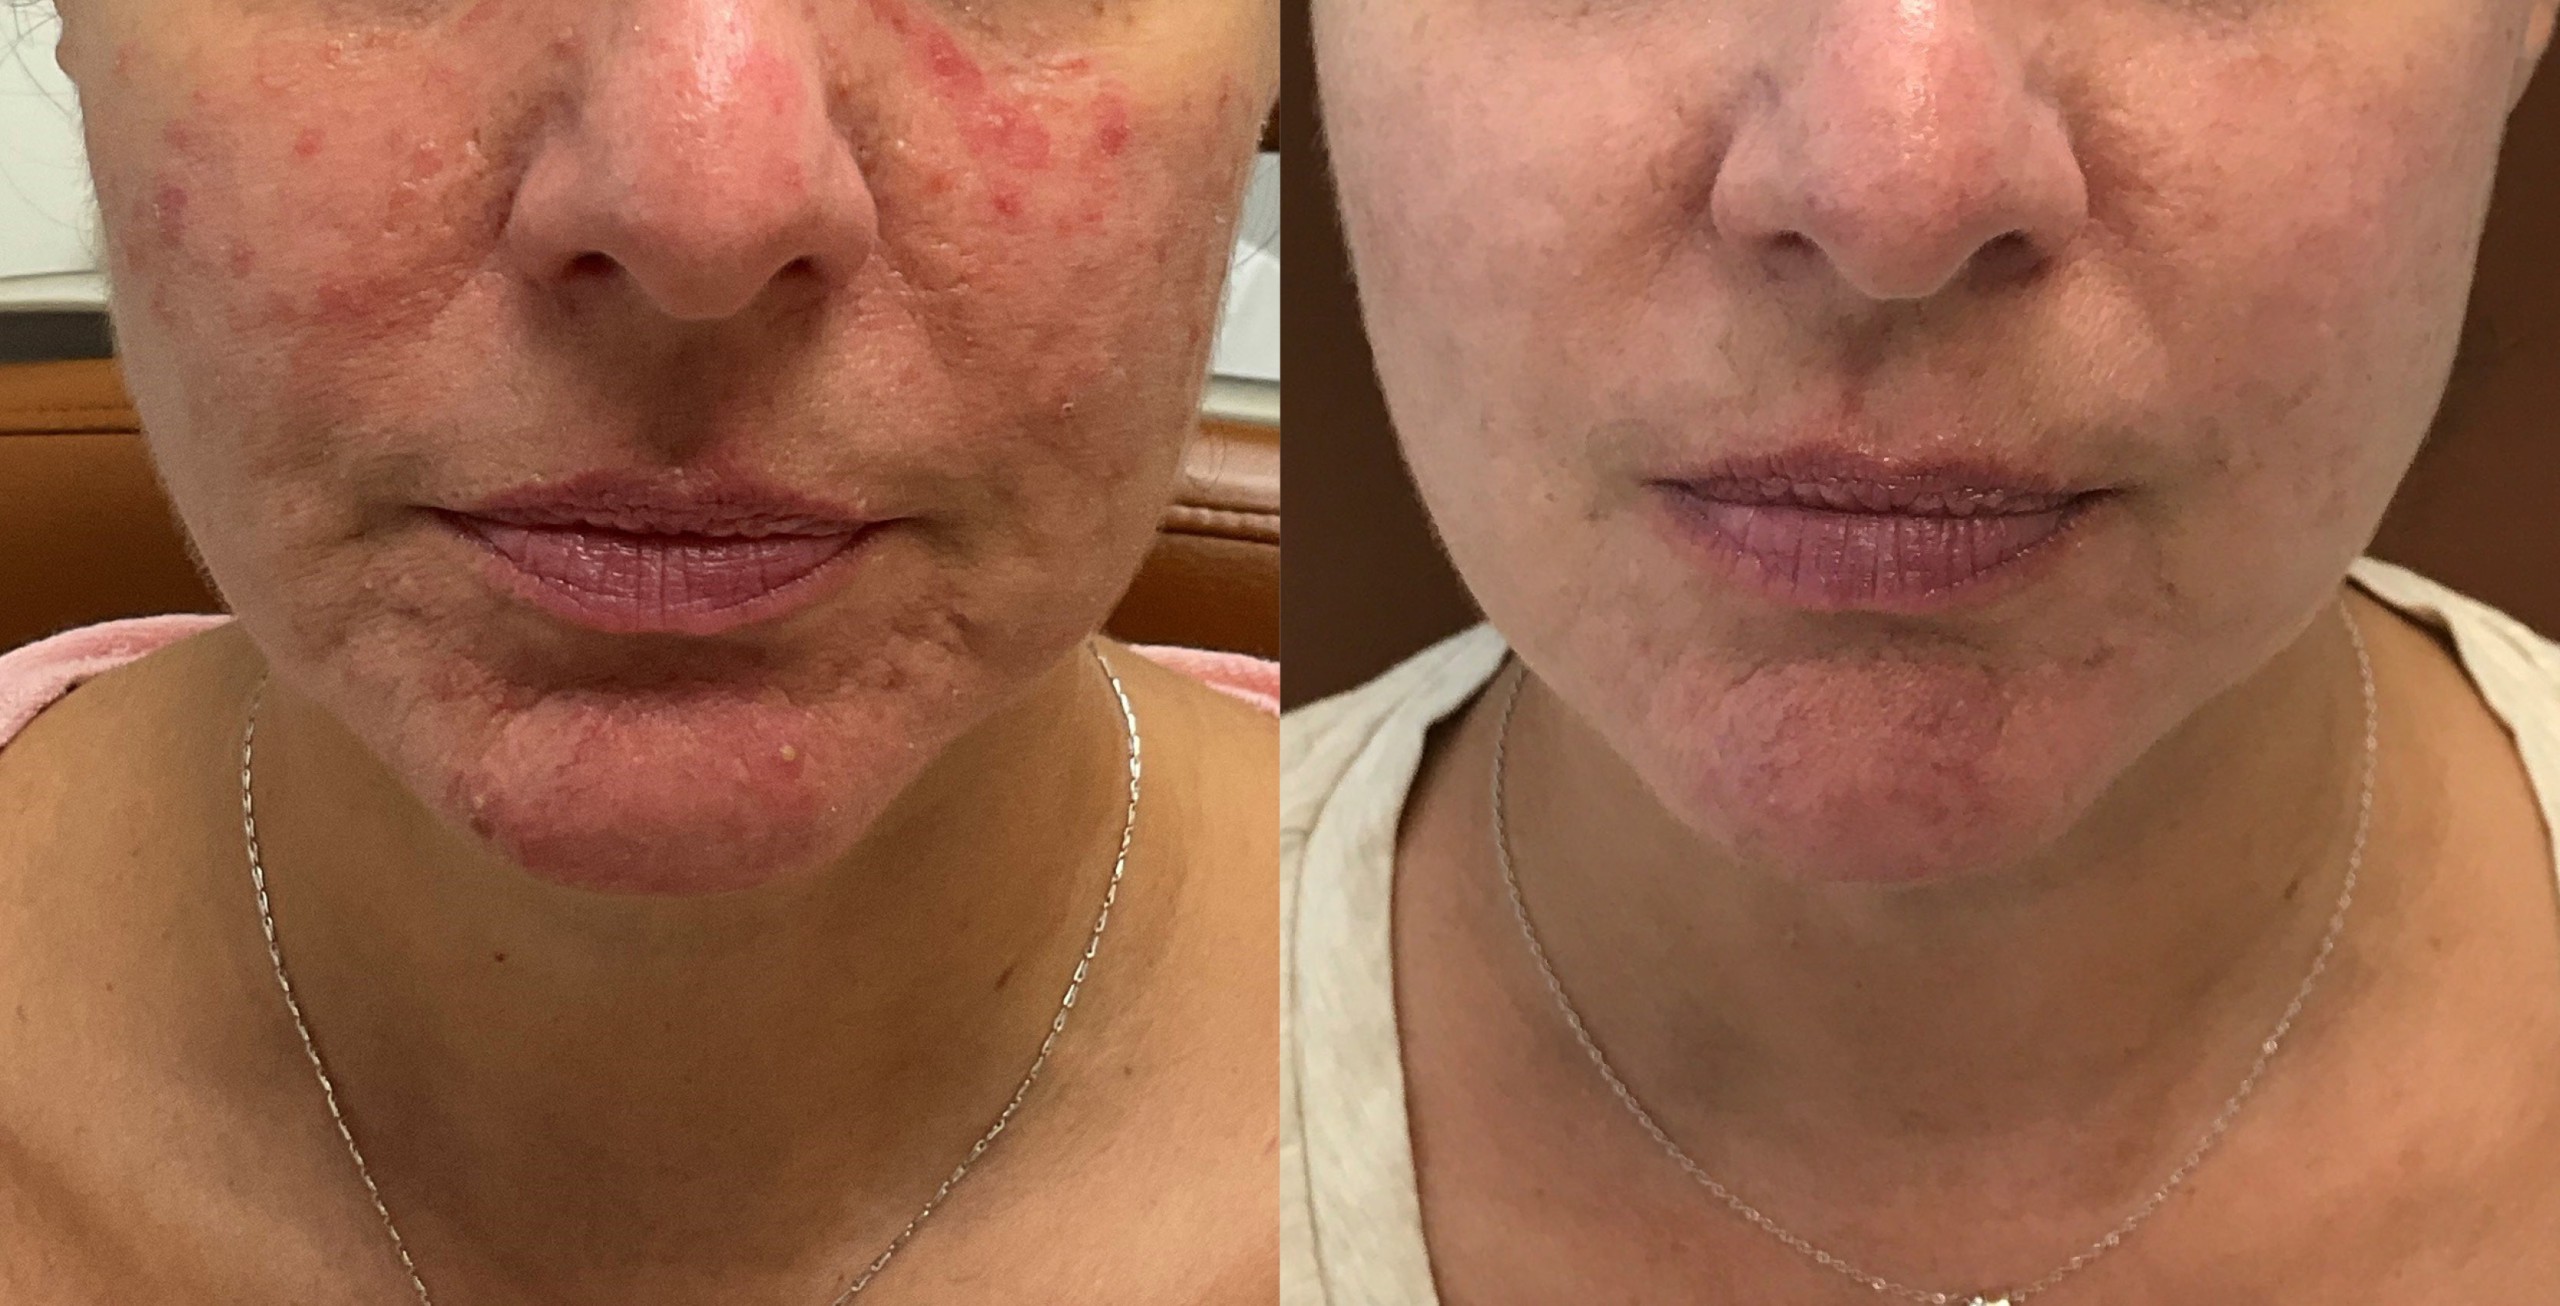 Rosacea treatment with holistic approach diet topical oral prescriptions